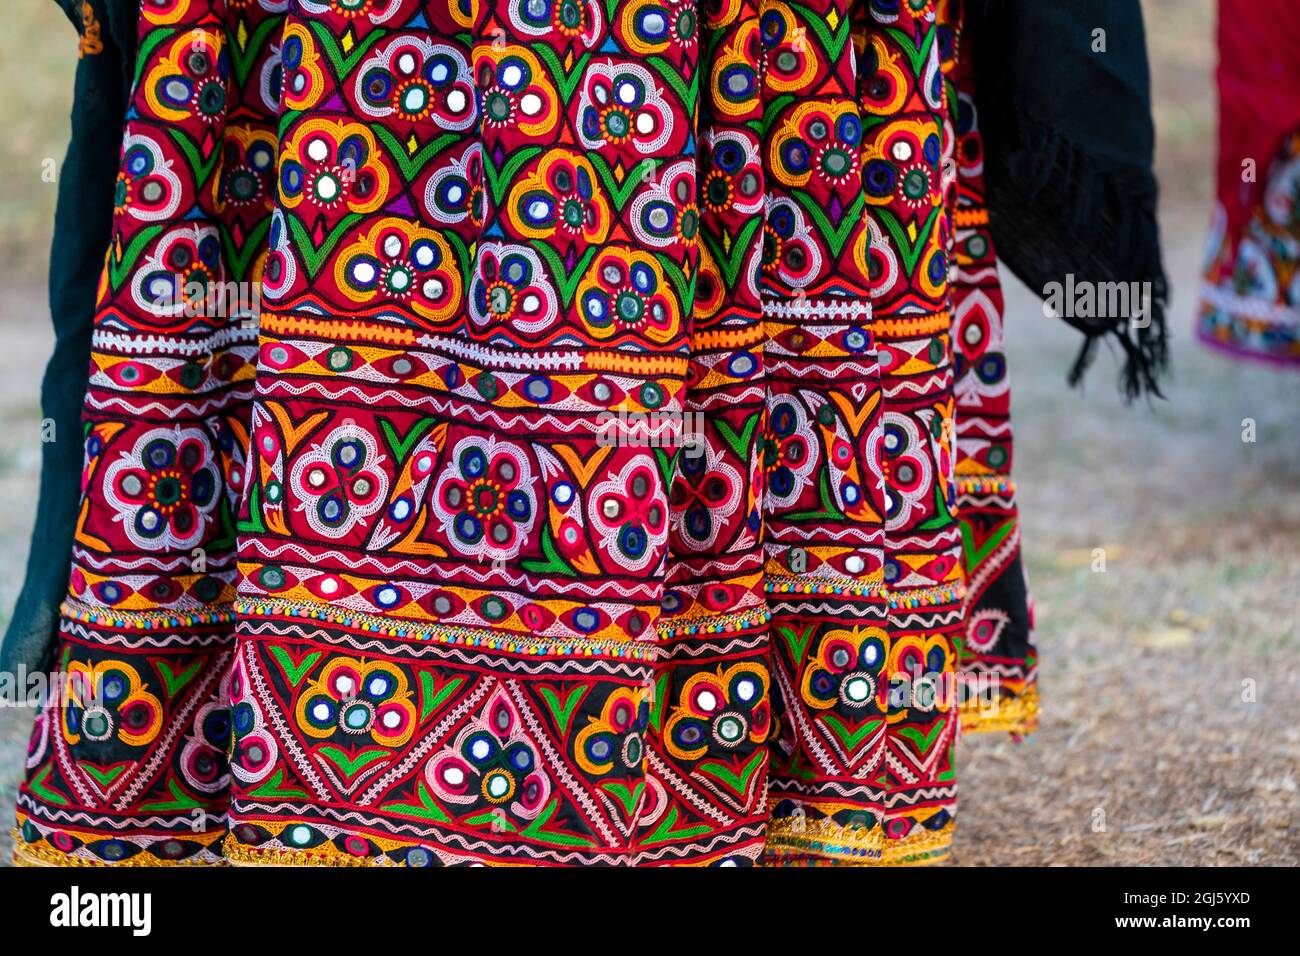 India, Gujarat, Bhuj, Great Rann of Kutch, Ahir Tribe. An example of the colorful intricate embroidery done by the Ahir Tribe. Stock Photo